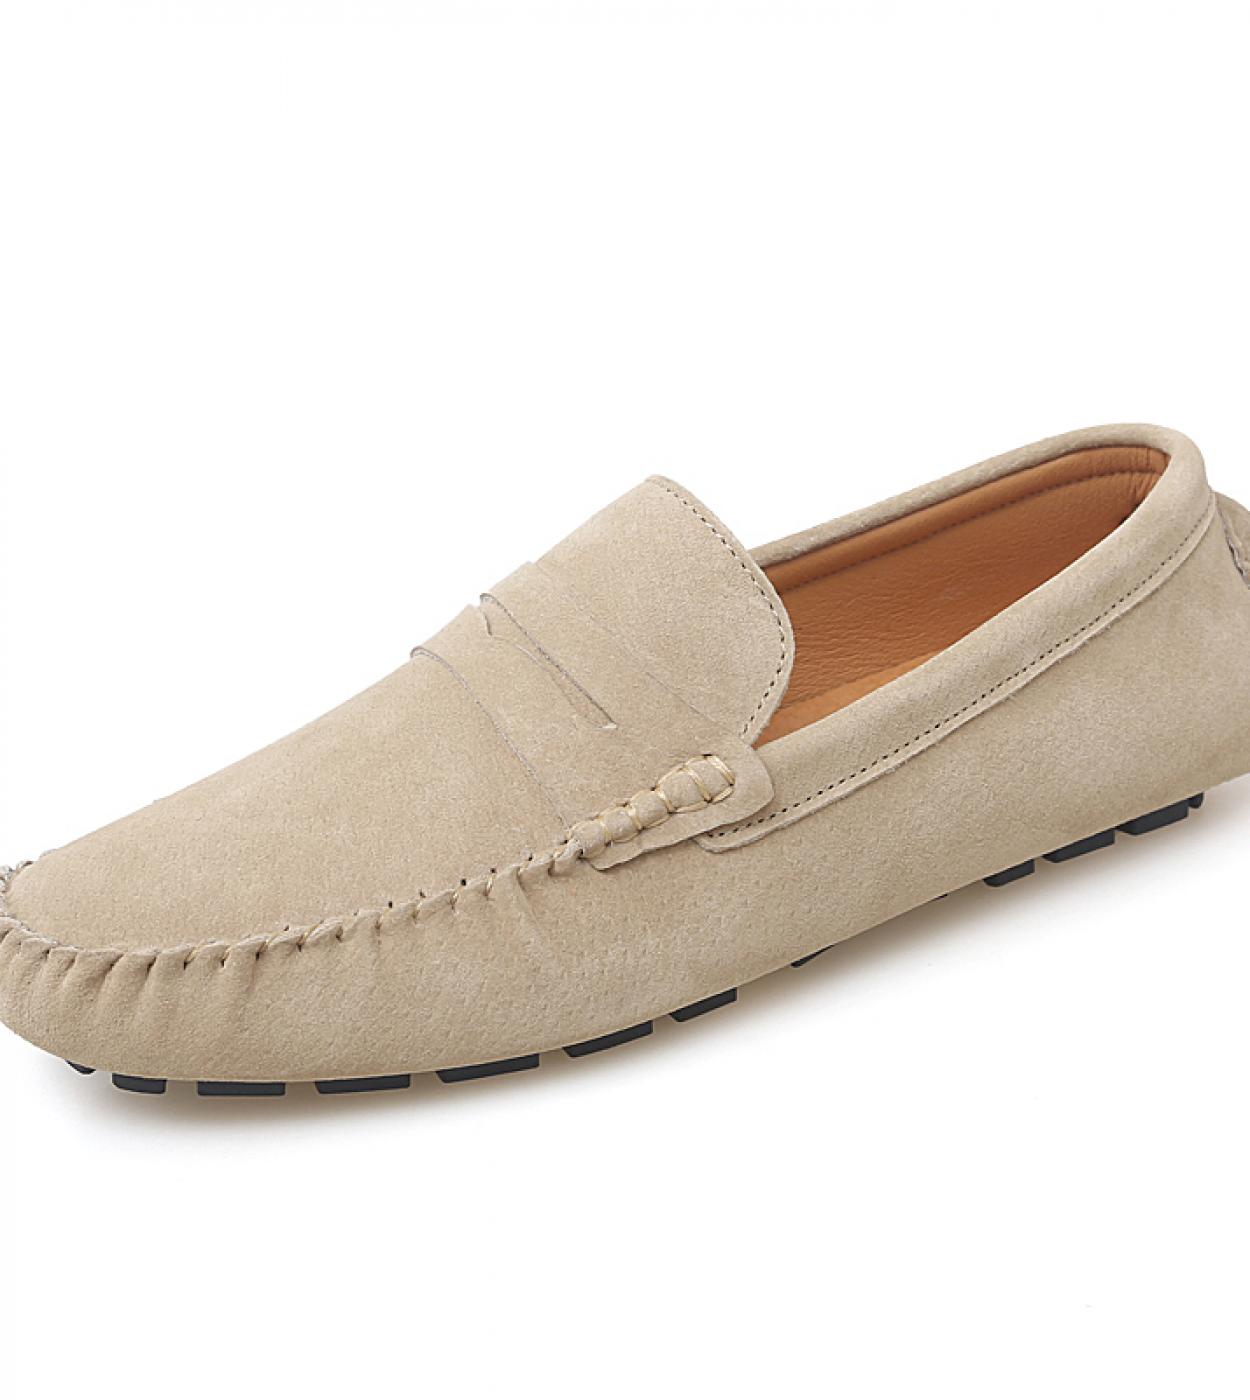 Men Casual Shoes Fashion Male Shoes Suede Soft Loafers Leisure Moccasins Slip On Mens Driving Shoes Man Lazy Shoe Size 